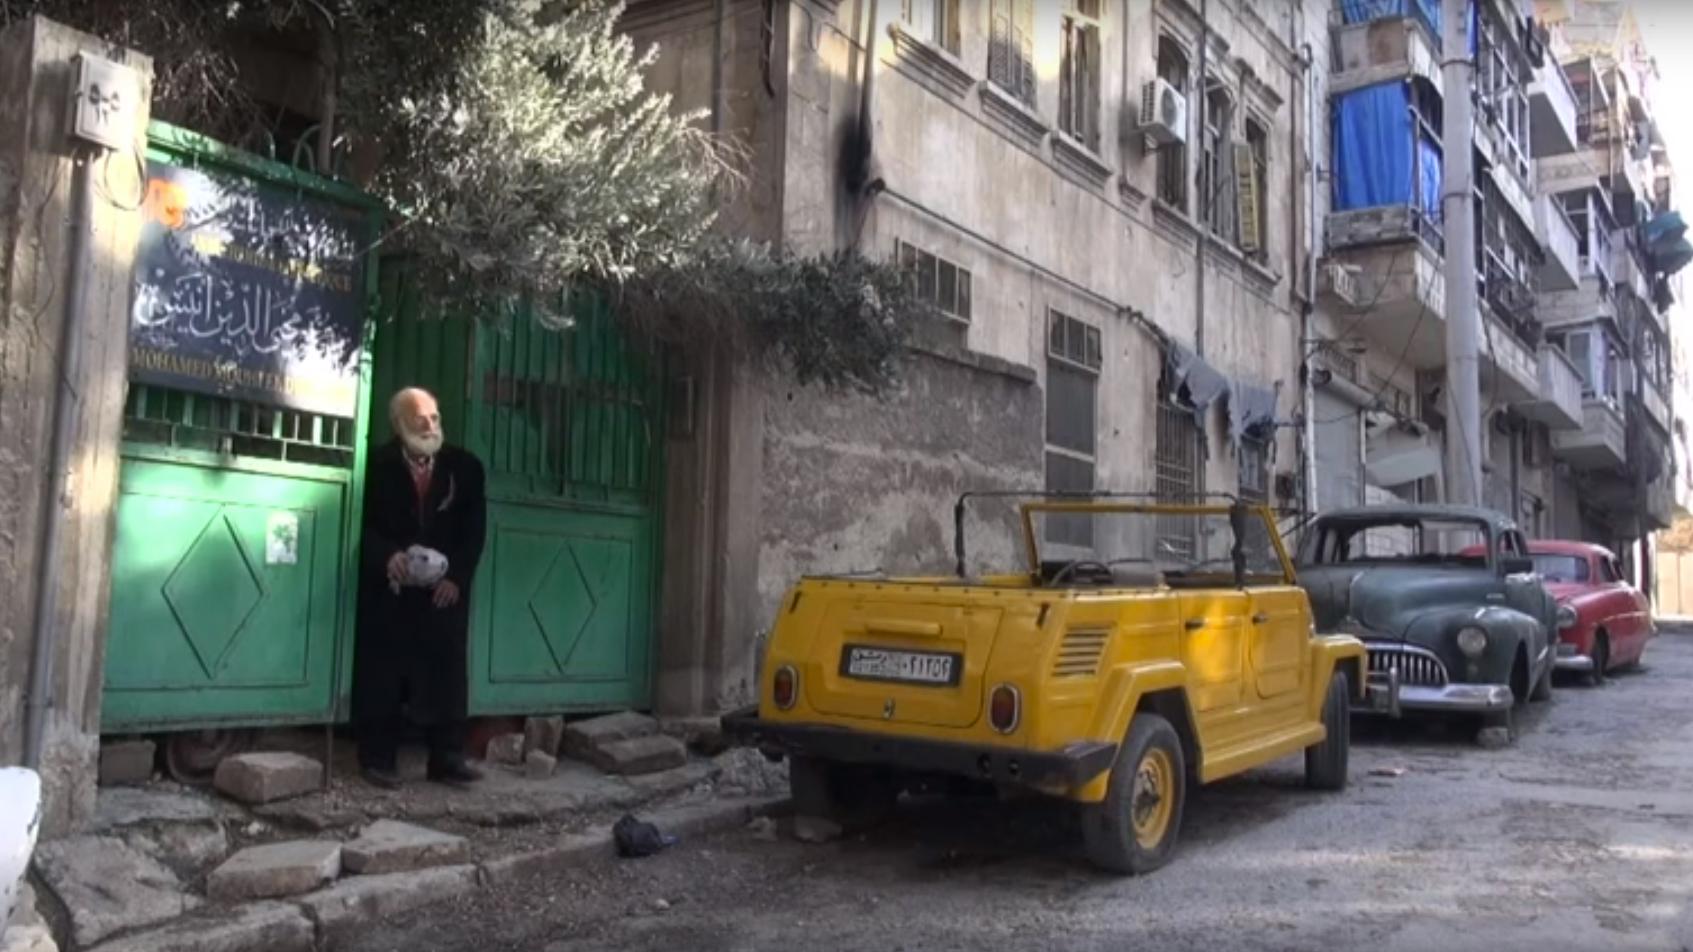 Abu Omar and his collection of vintage cars in Aleppo, Syria.